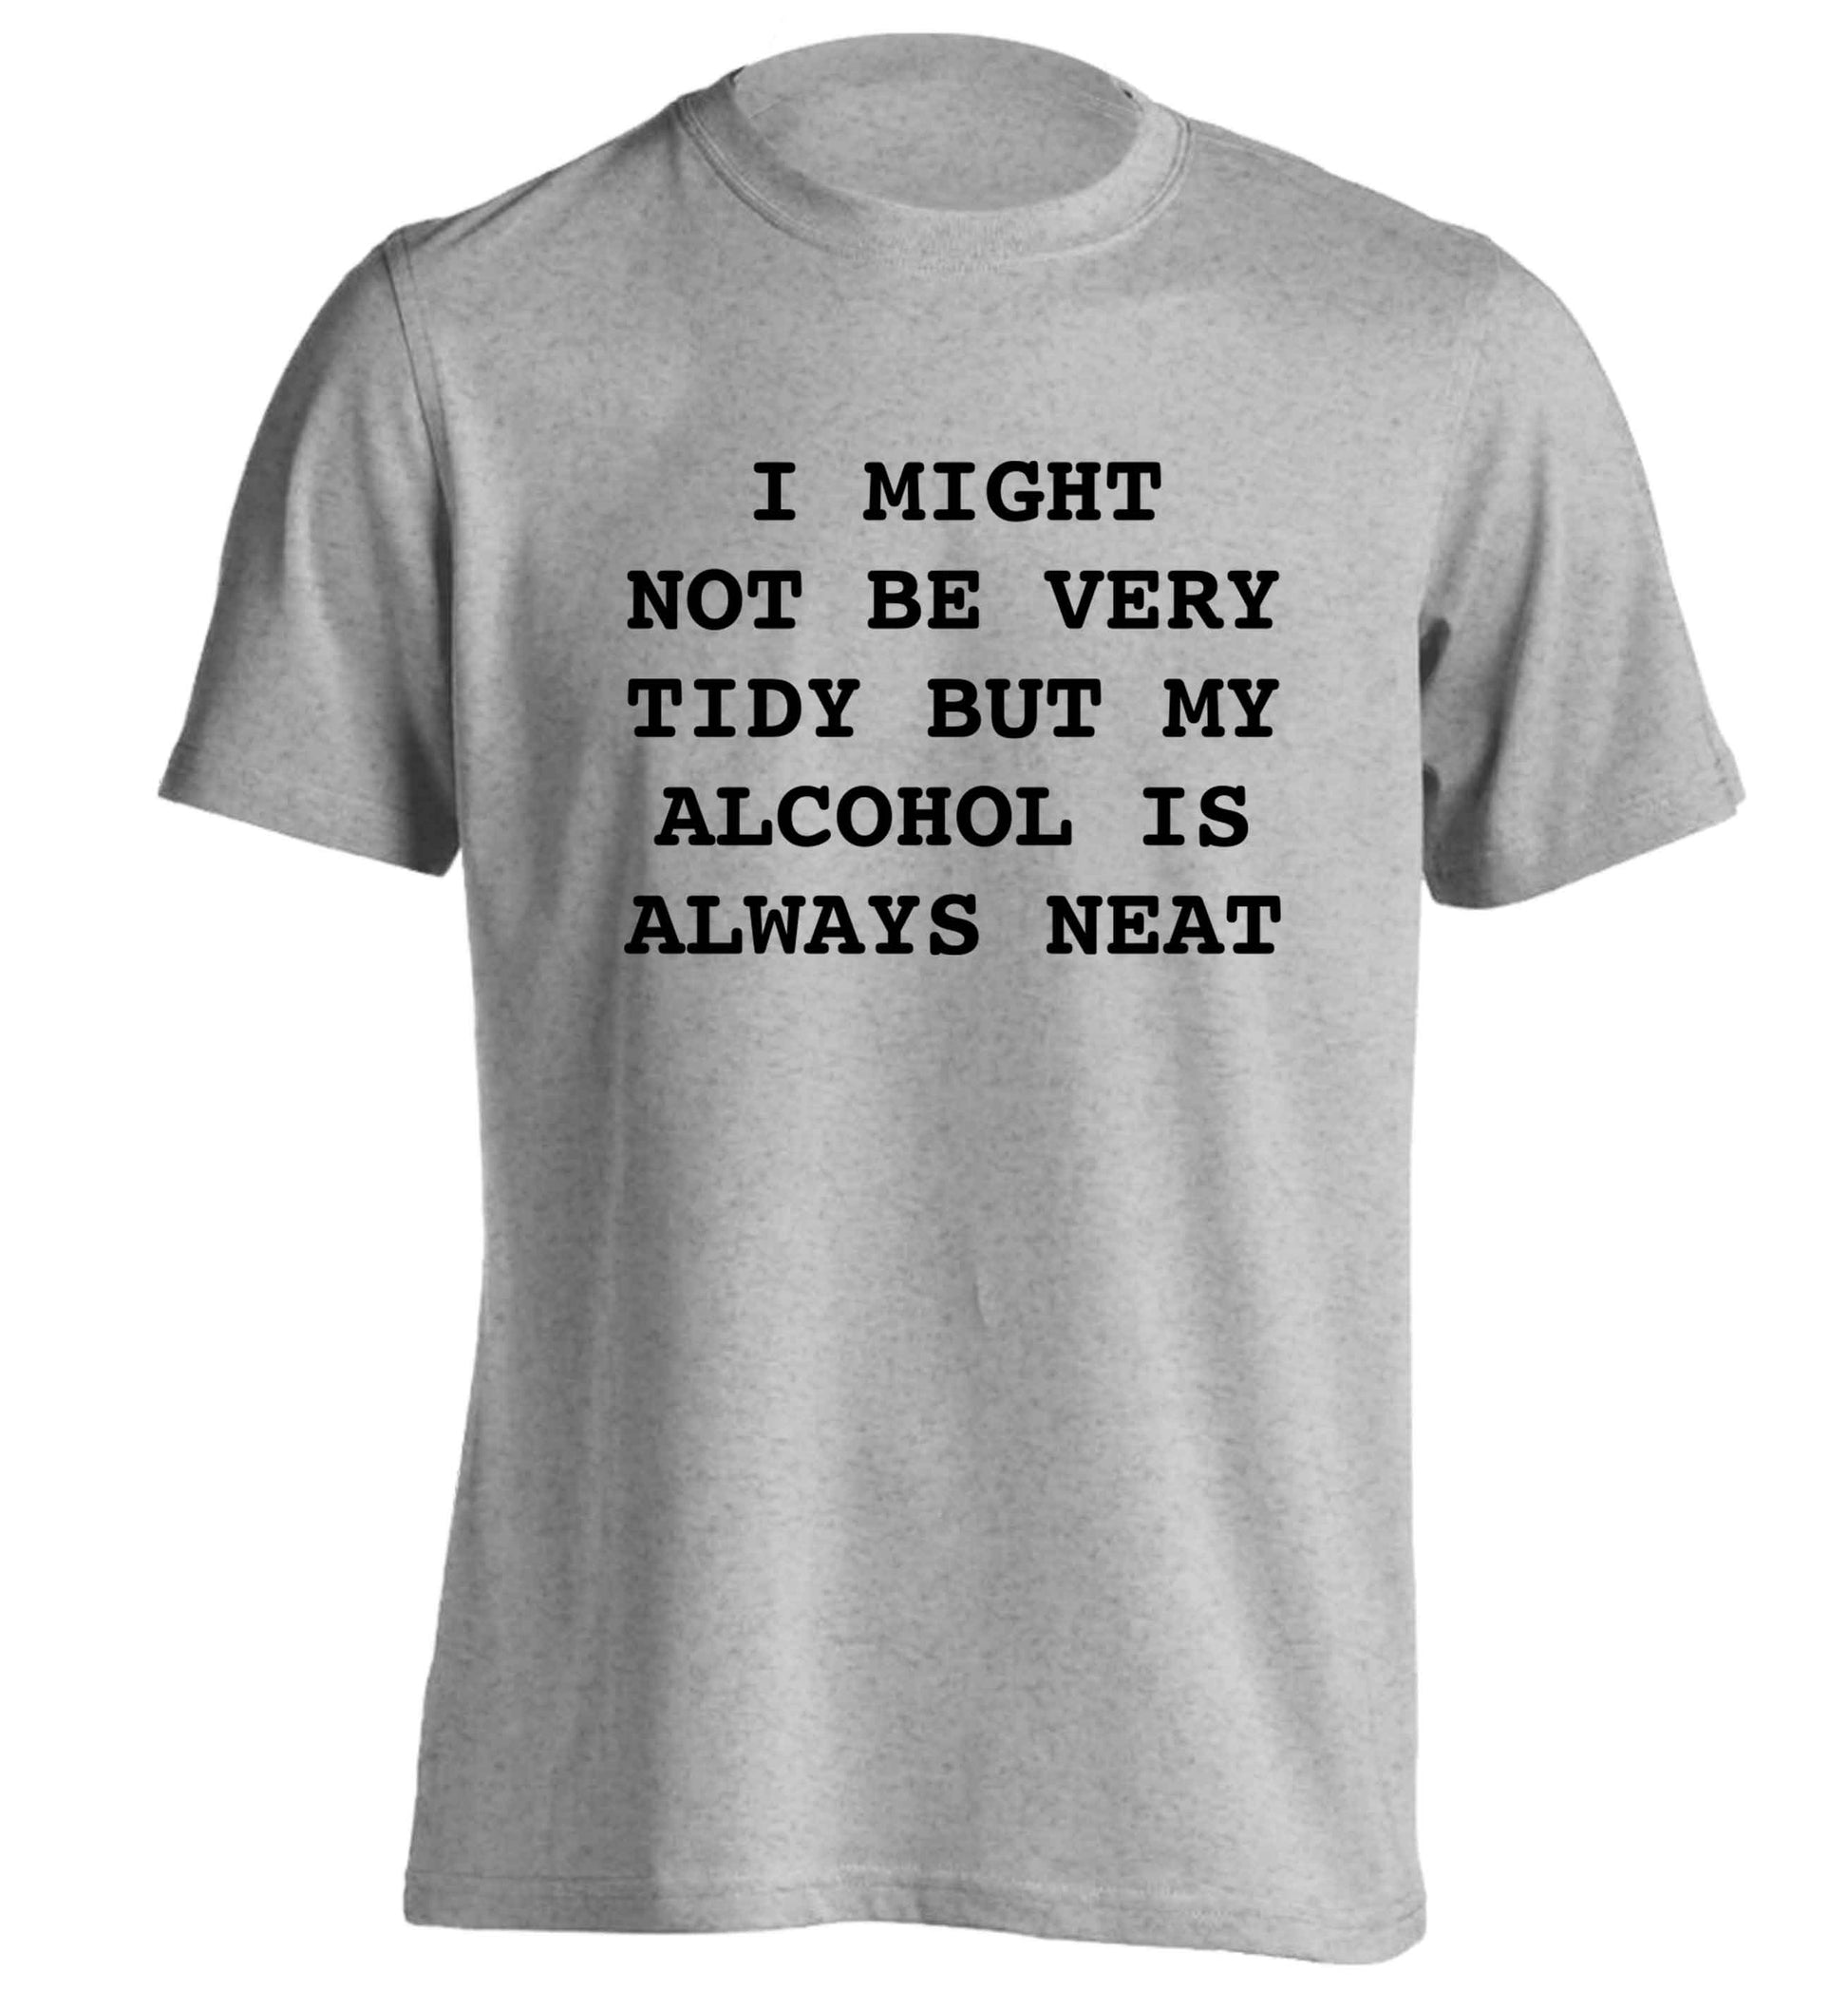 I might not be tidy but my alcohol is always neat adults unisex grey Tshirt 2XL